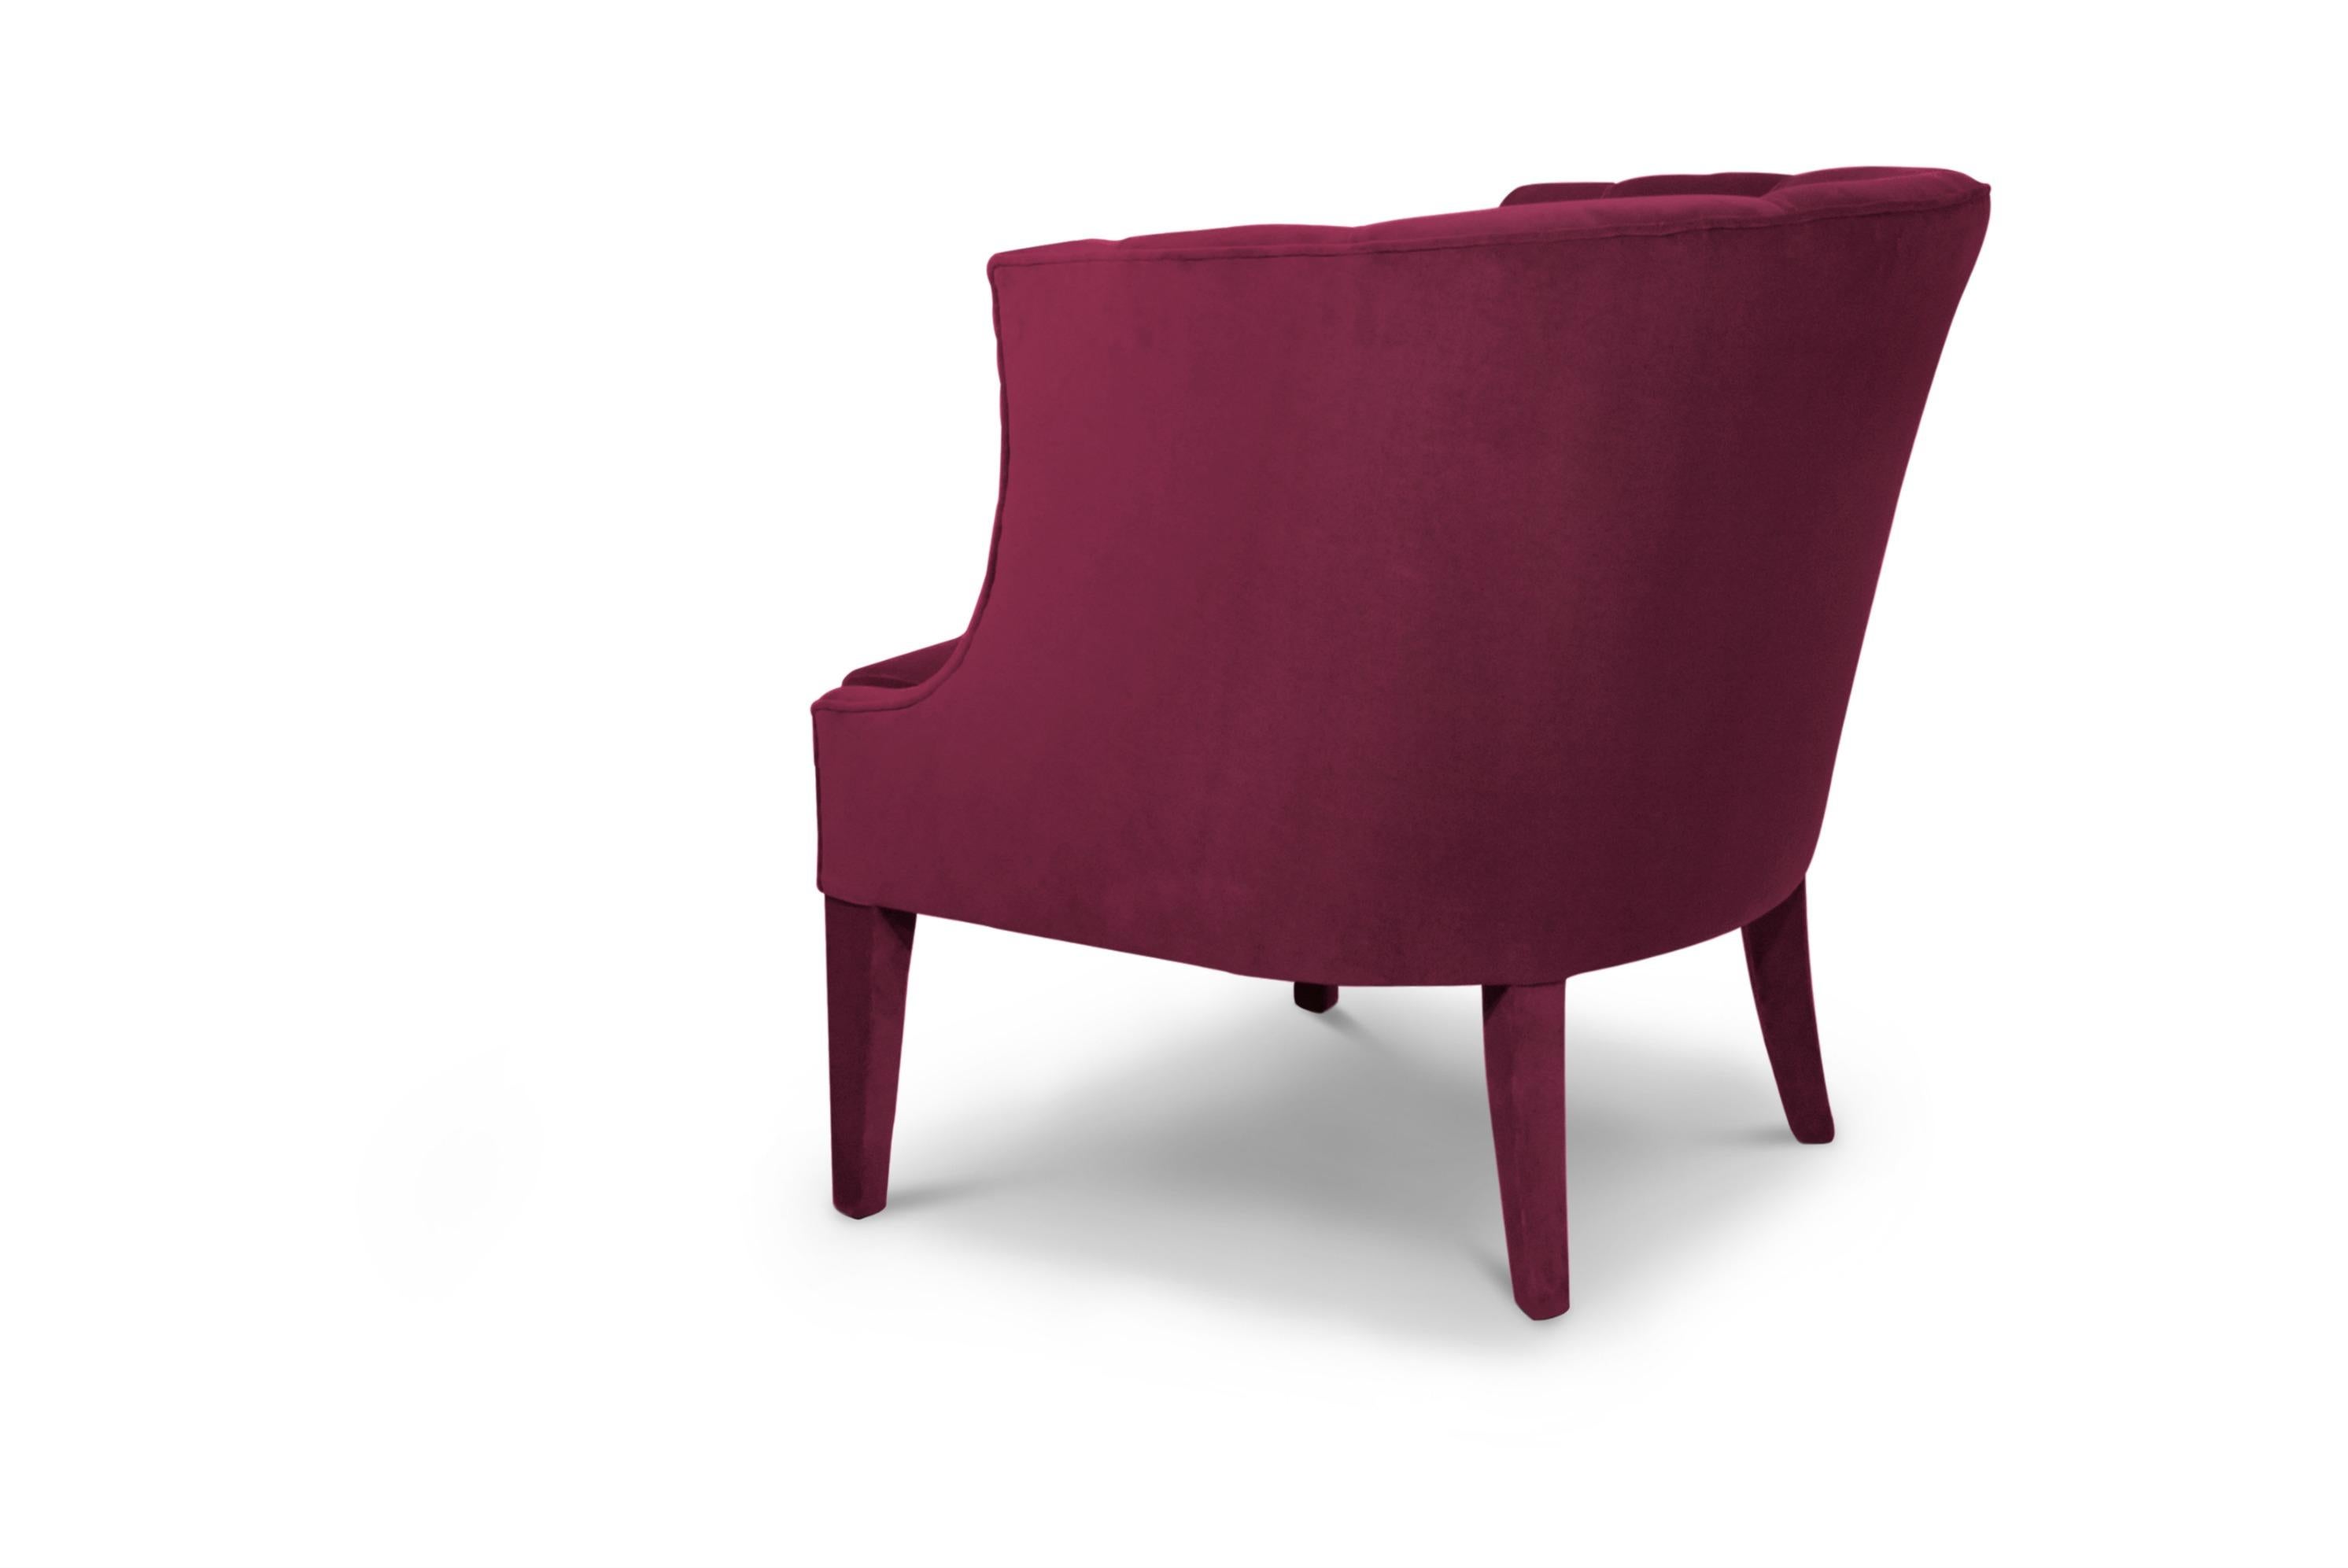 Begonia is a beautiful flower from tropical countries. Inspired by its warm energies and the bold shape of its petals, our designers conceived Begonia Accent chair. Its charming curves and soft cotton velvet upholstery make this the perfect curved